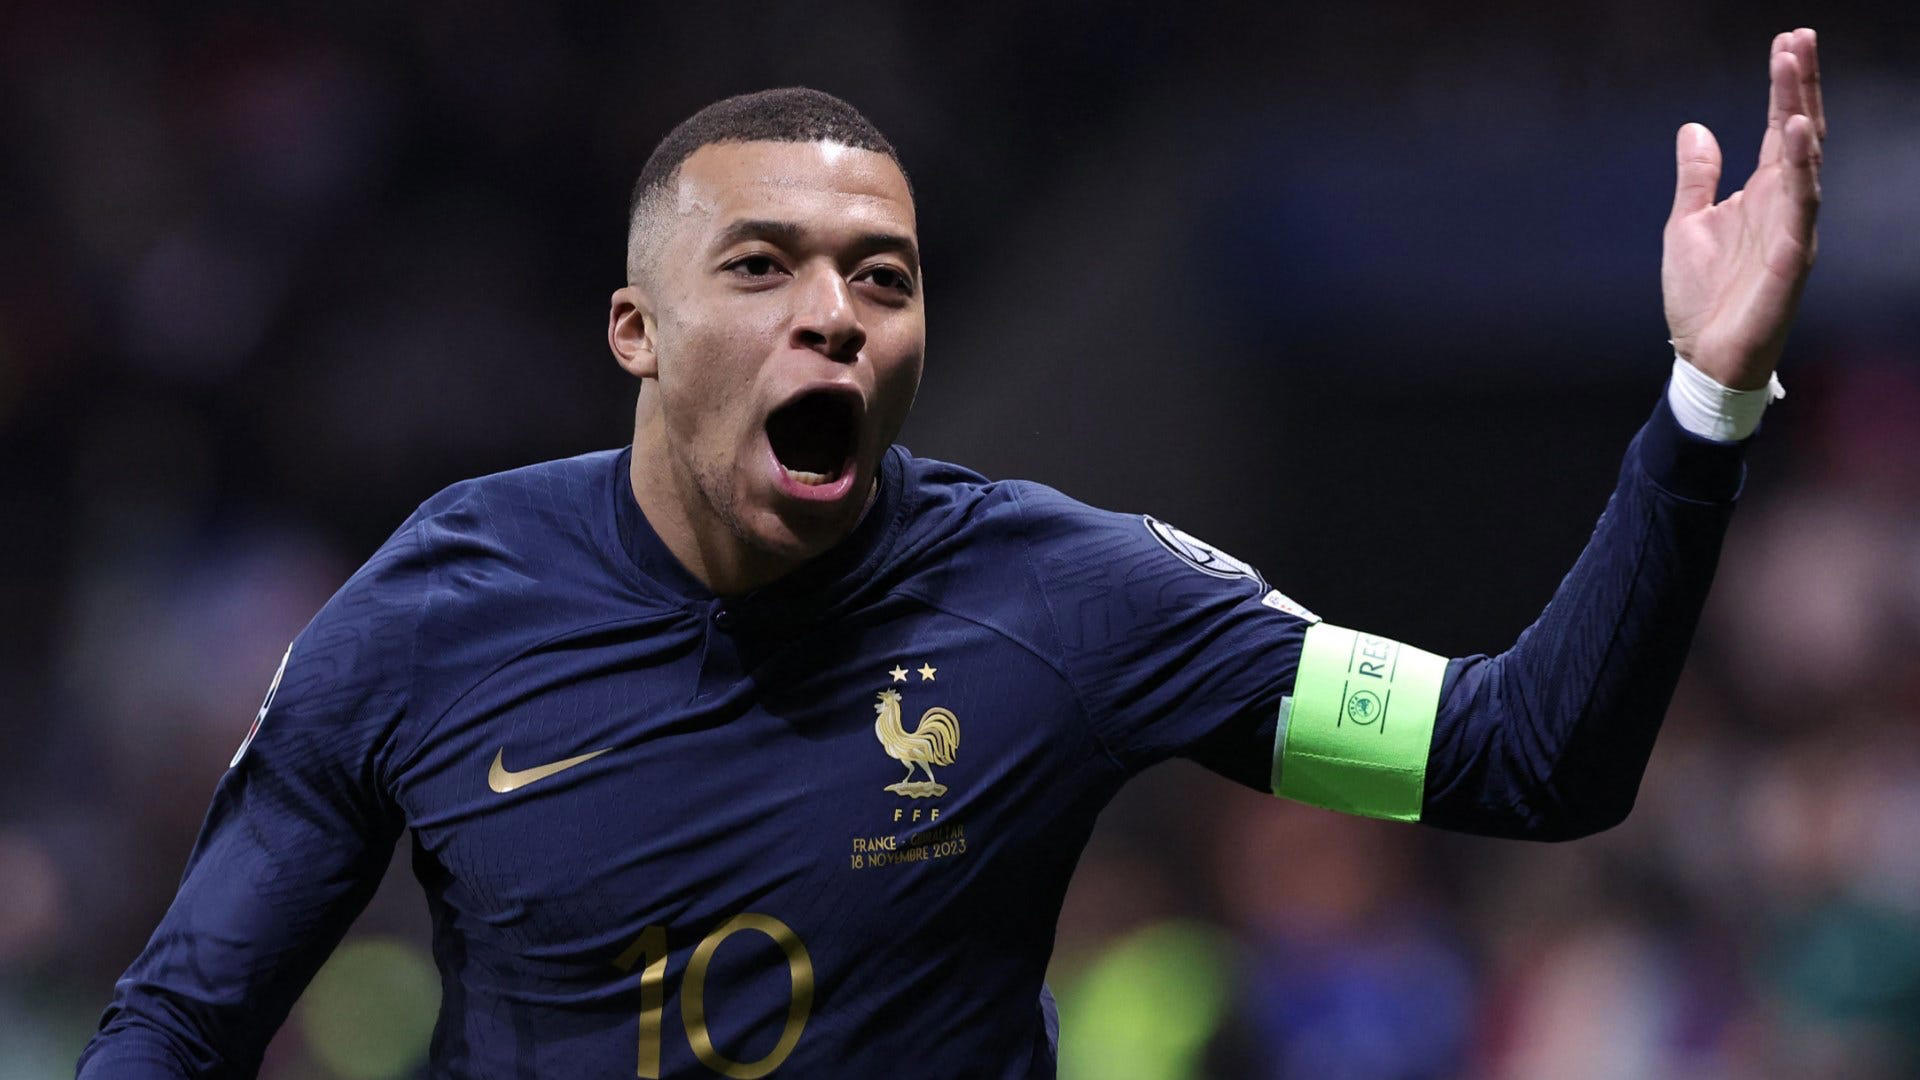 Will Kylian Mbappe play at the 2024 Olympics? France boss Didier